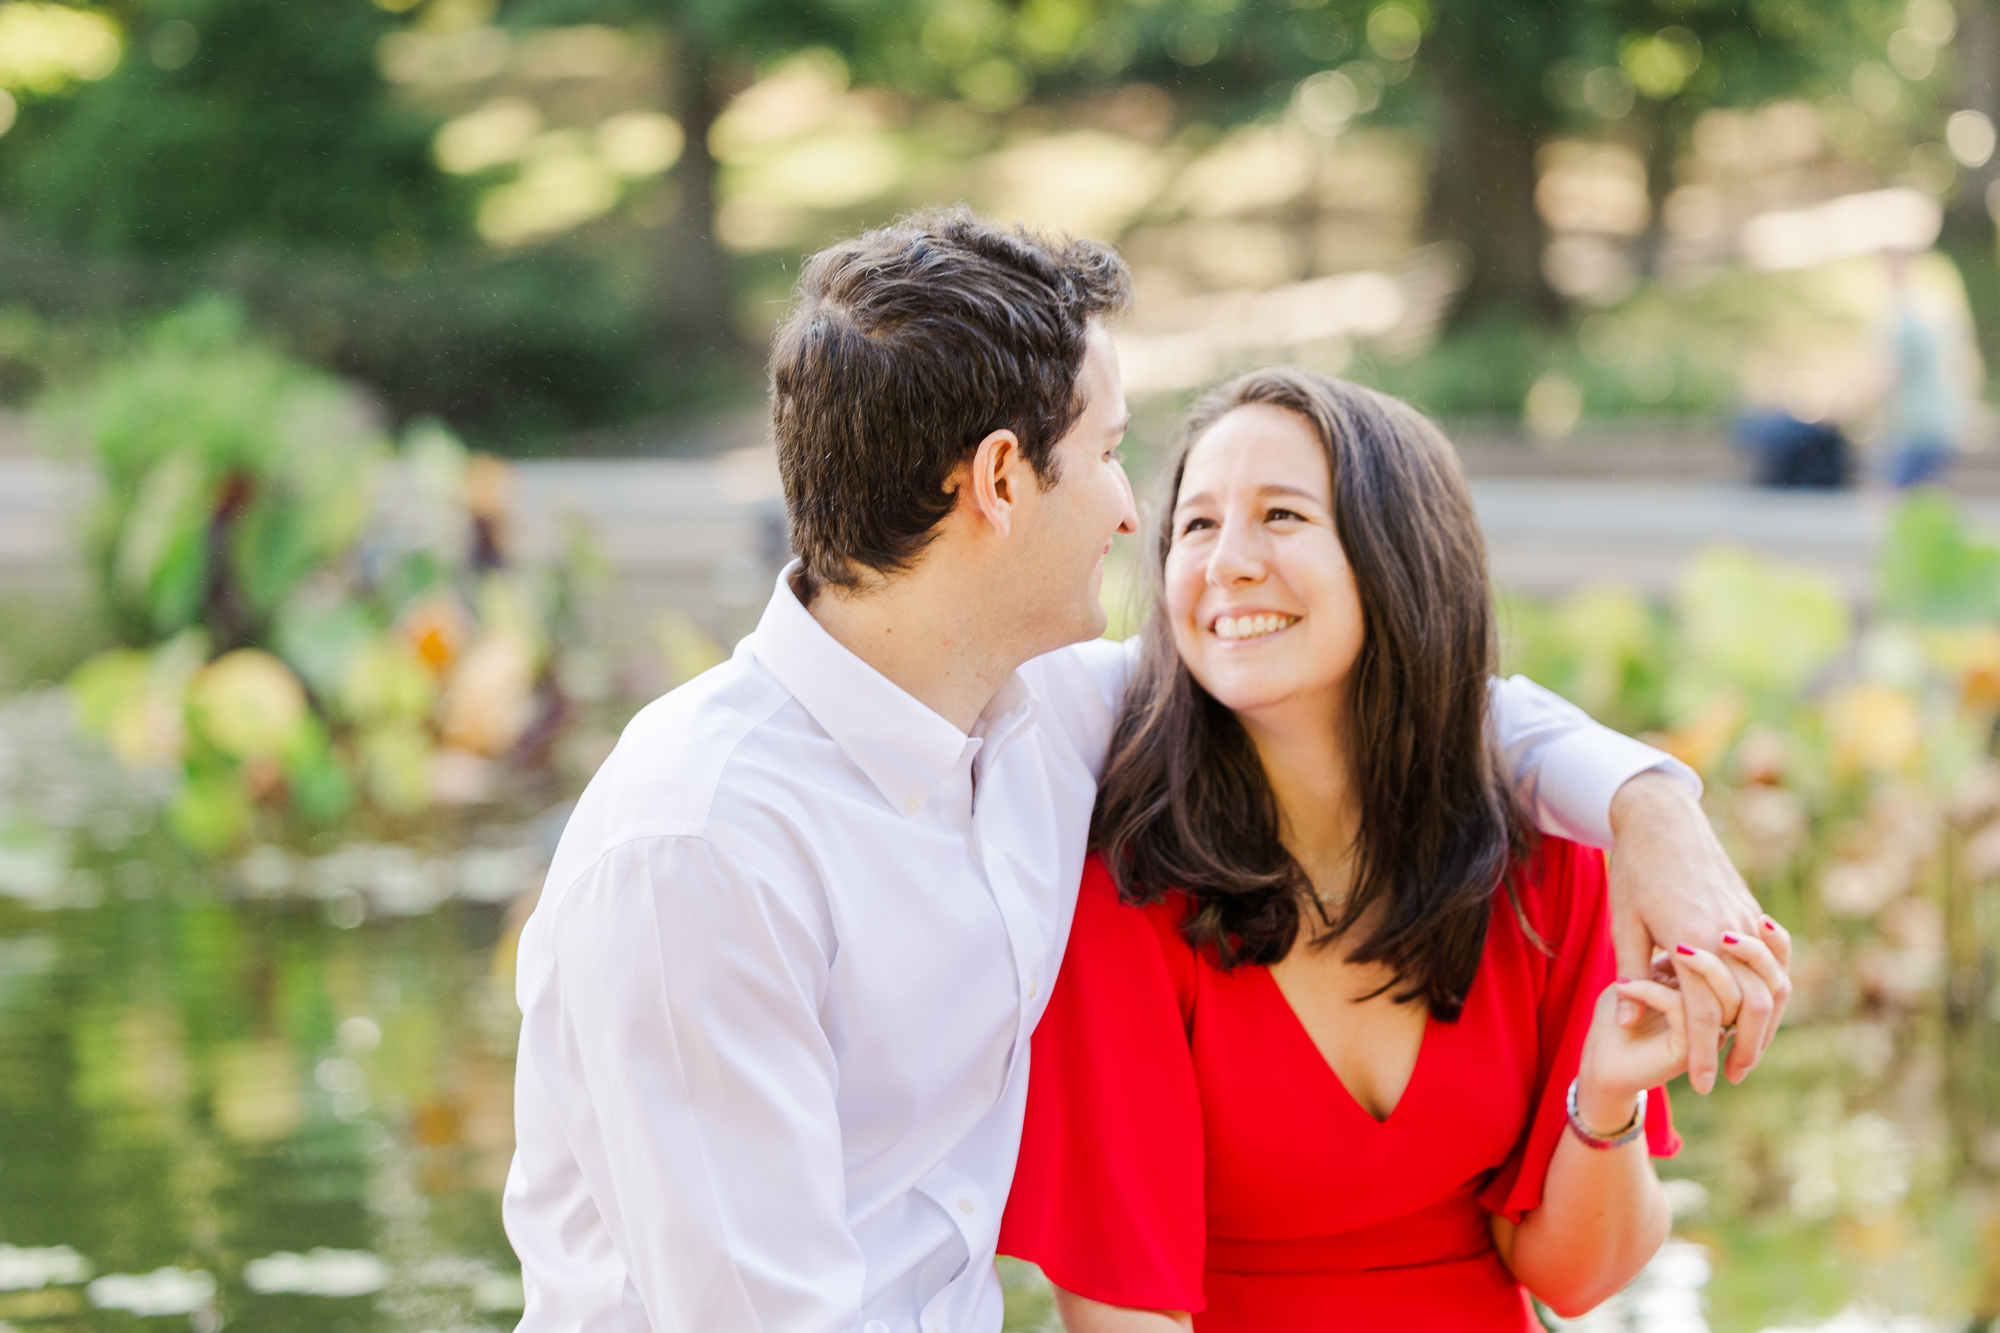 Flawless Central Park Engagement Photos